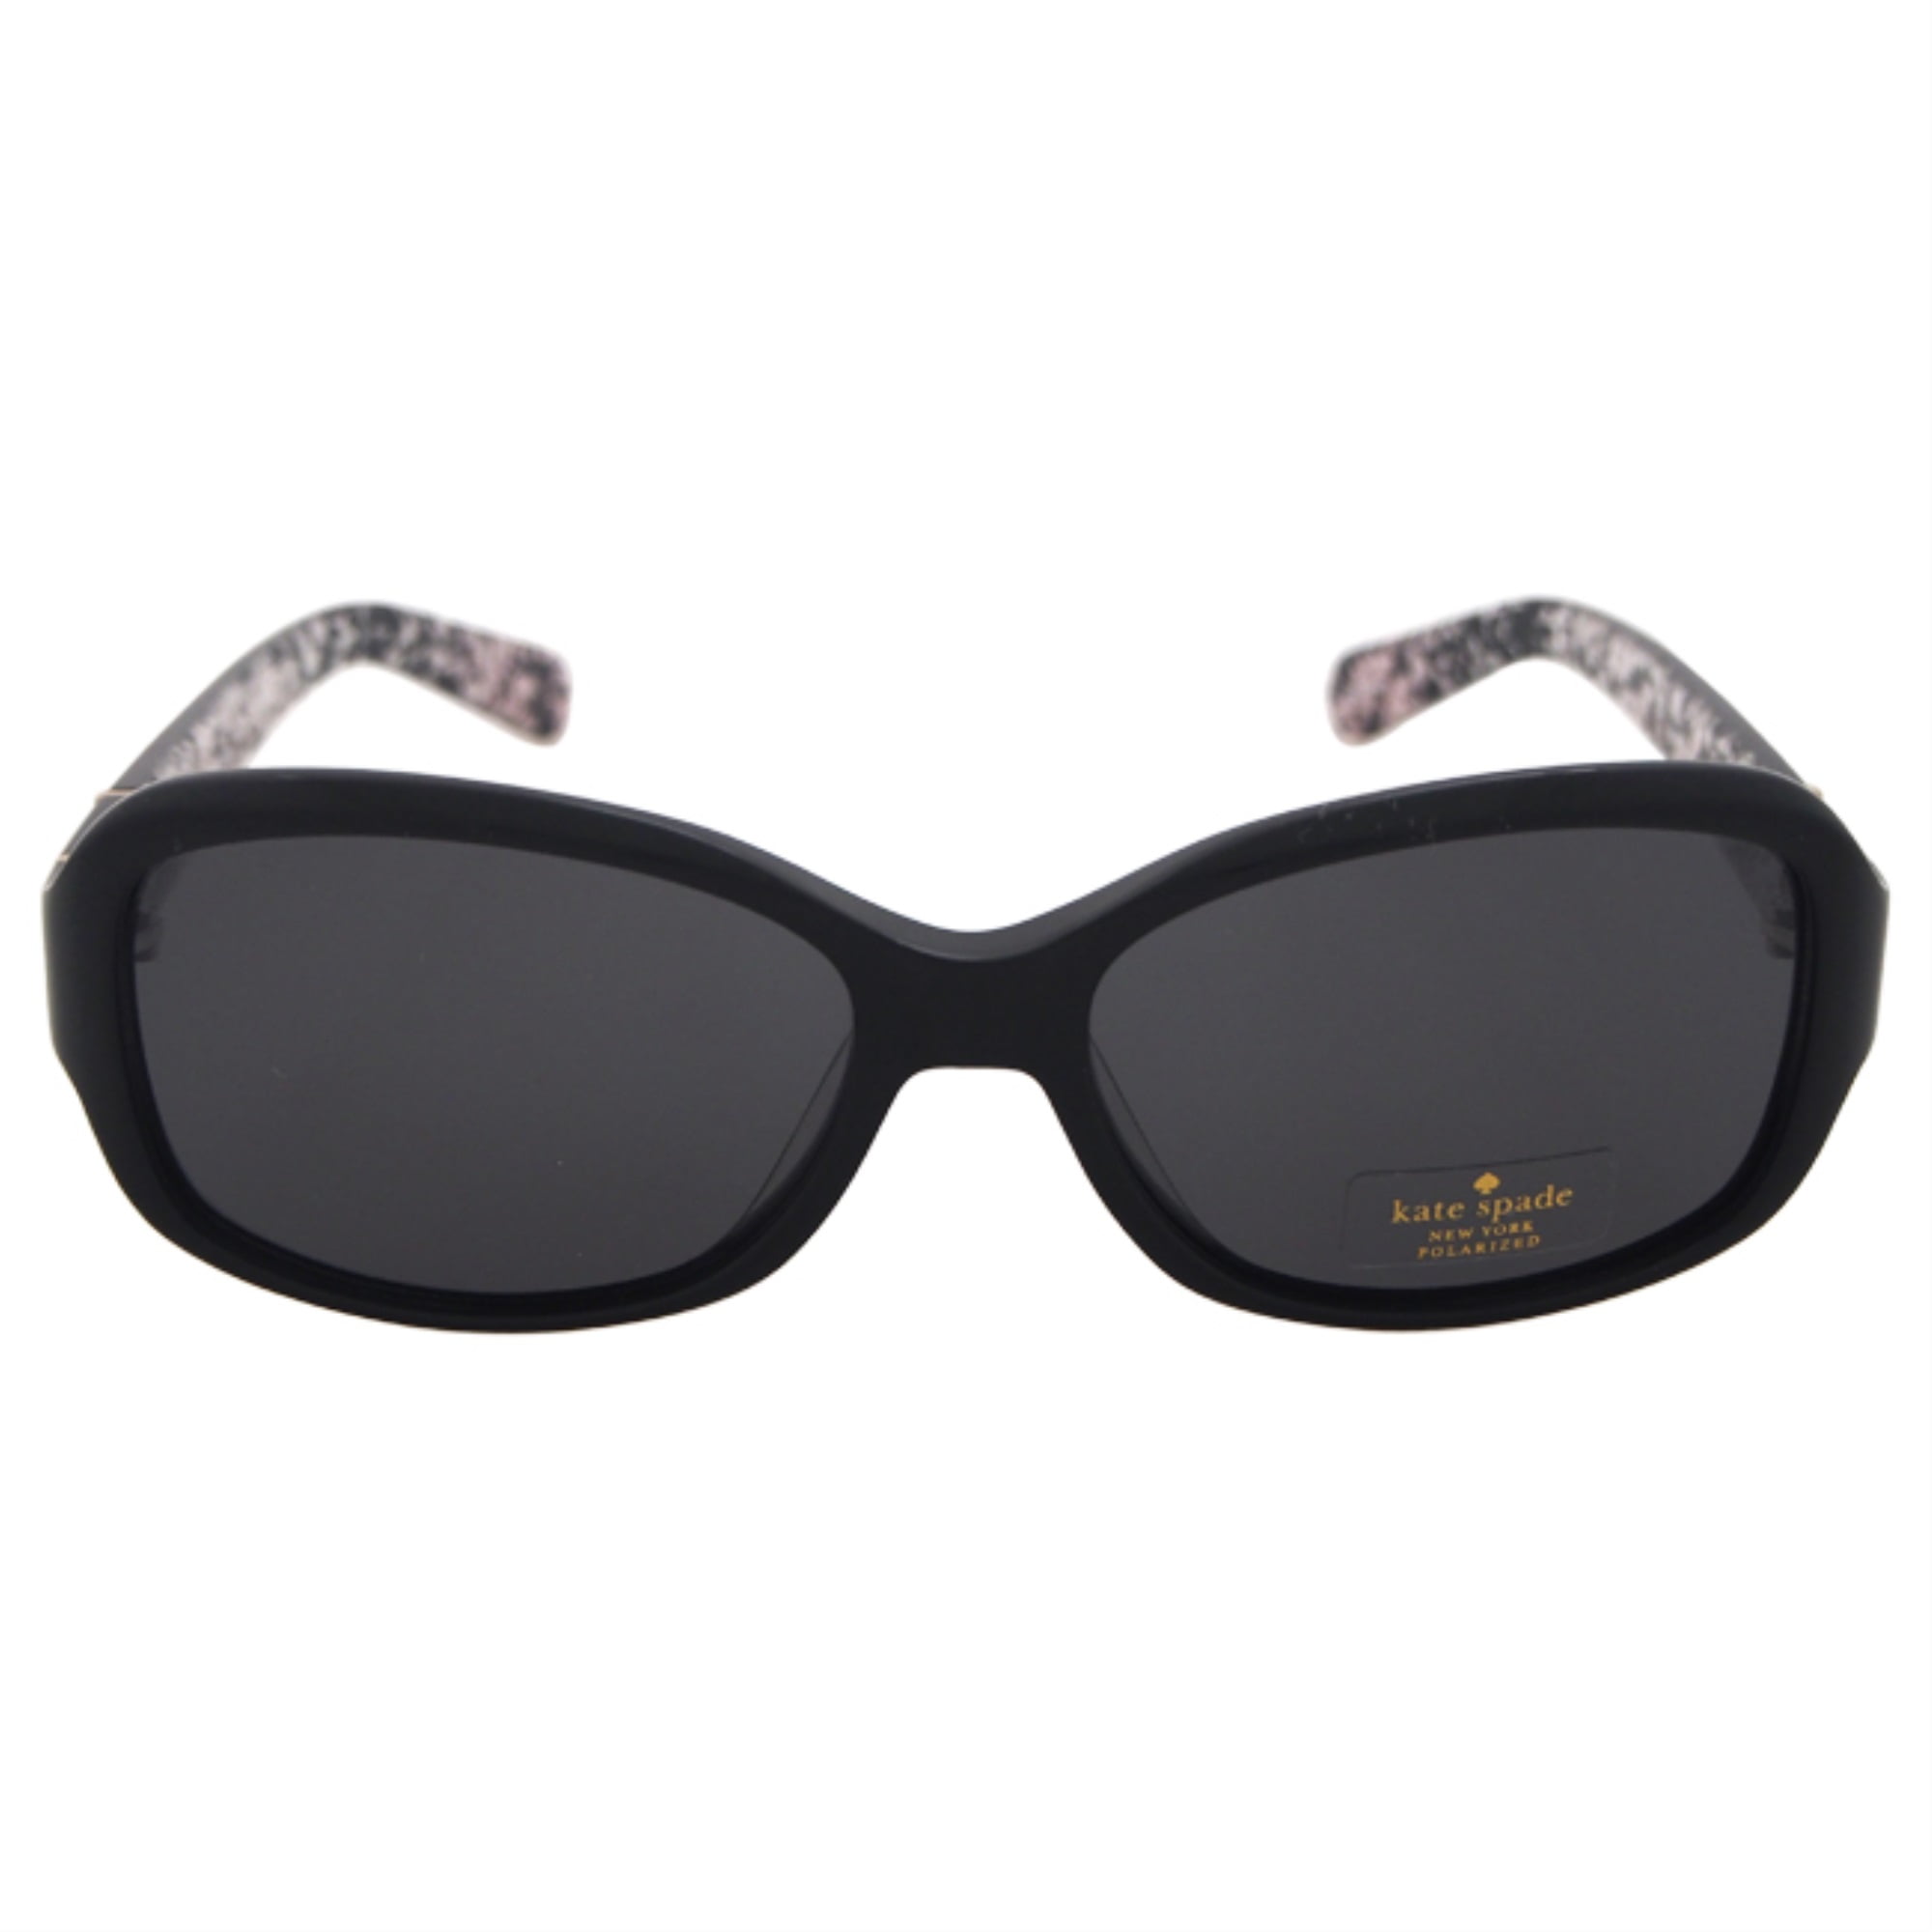 Kate Spade Cheyenne/P/S/ Y21P - Black Polarized by Kate Spade for Women -  55-16-130 mm Sunglasses 